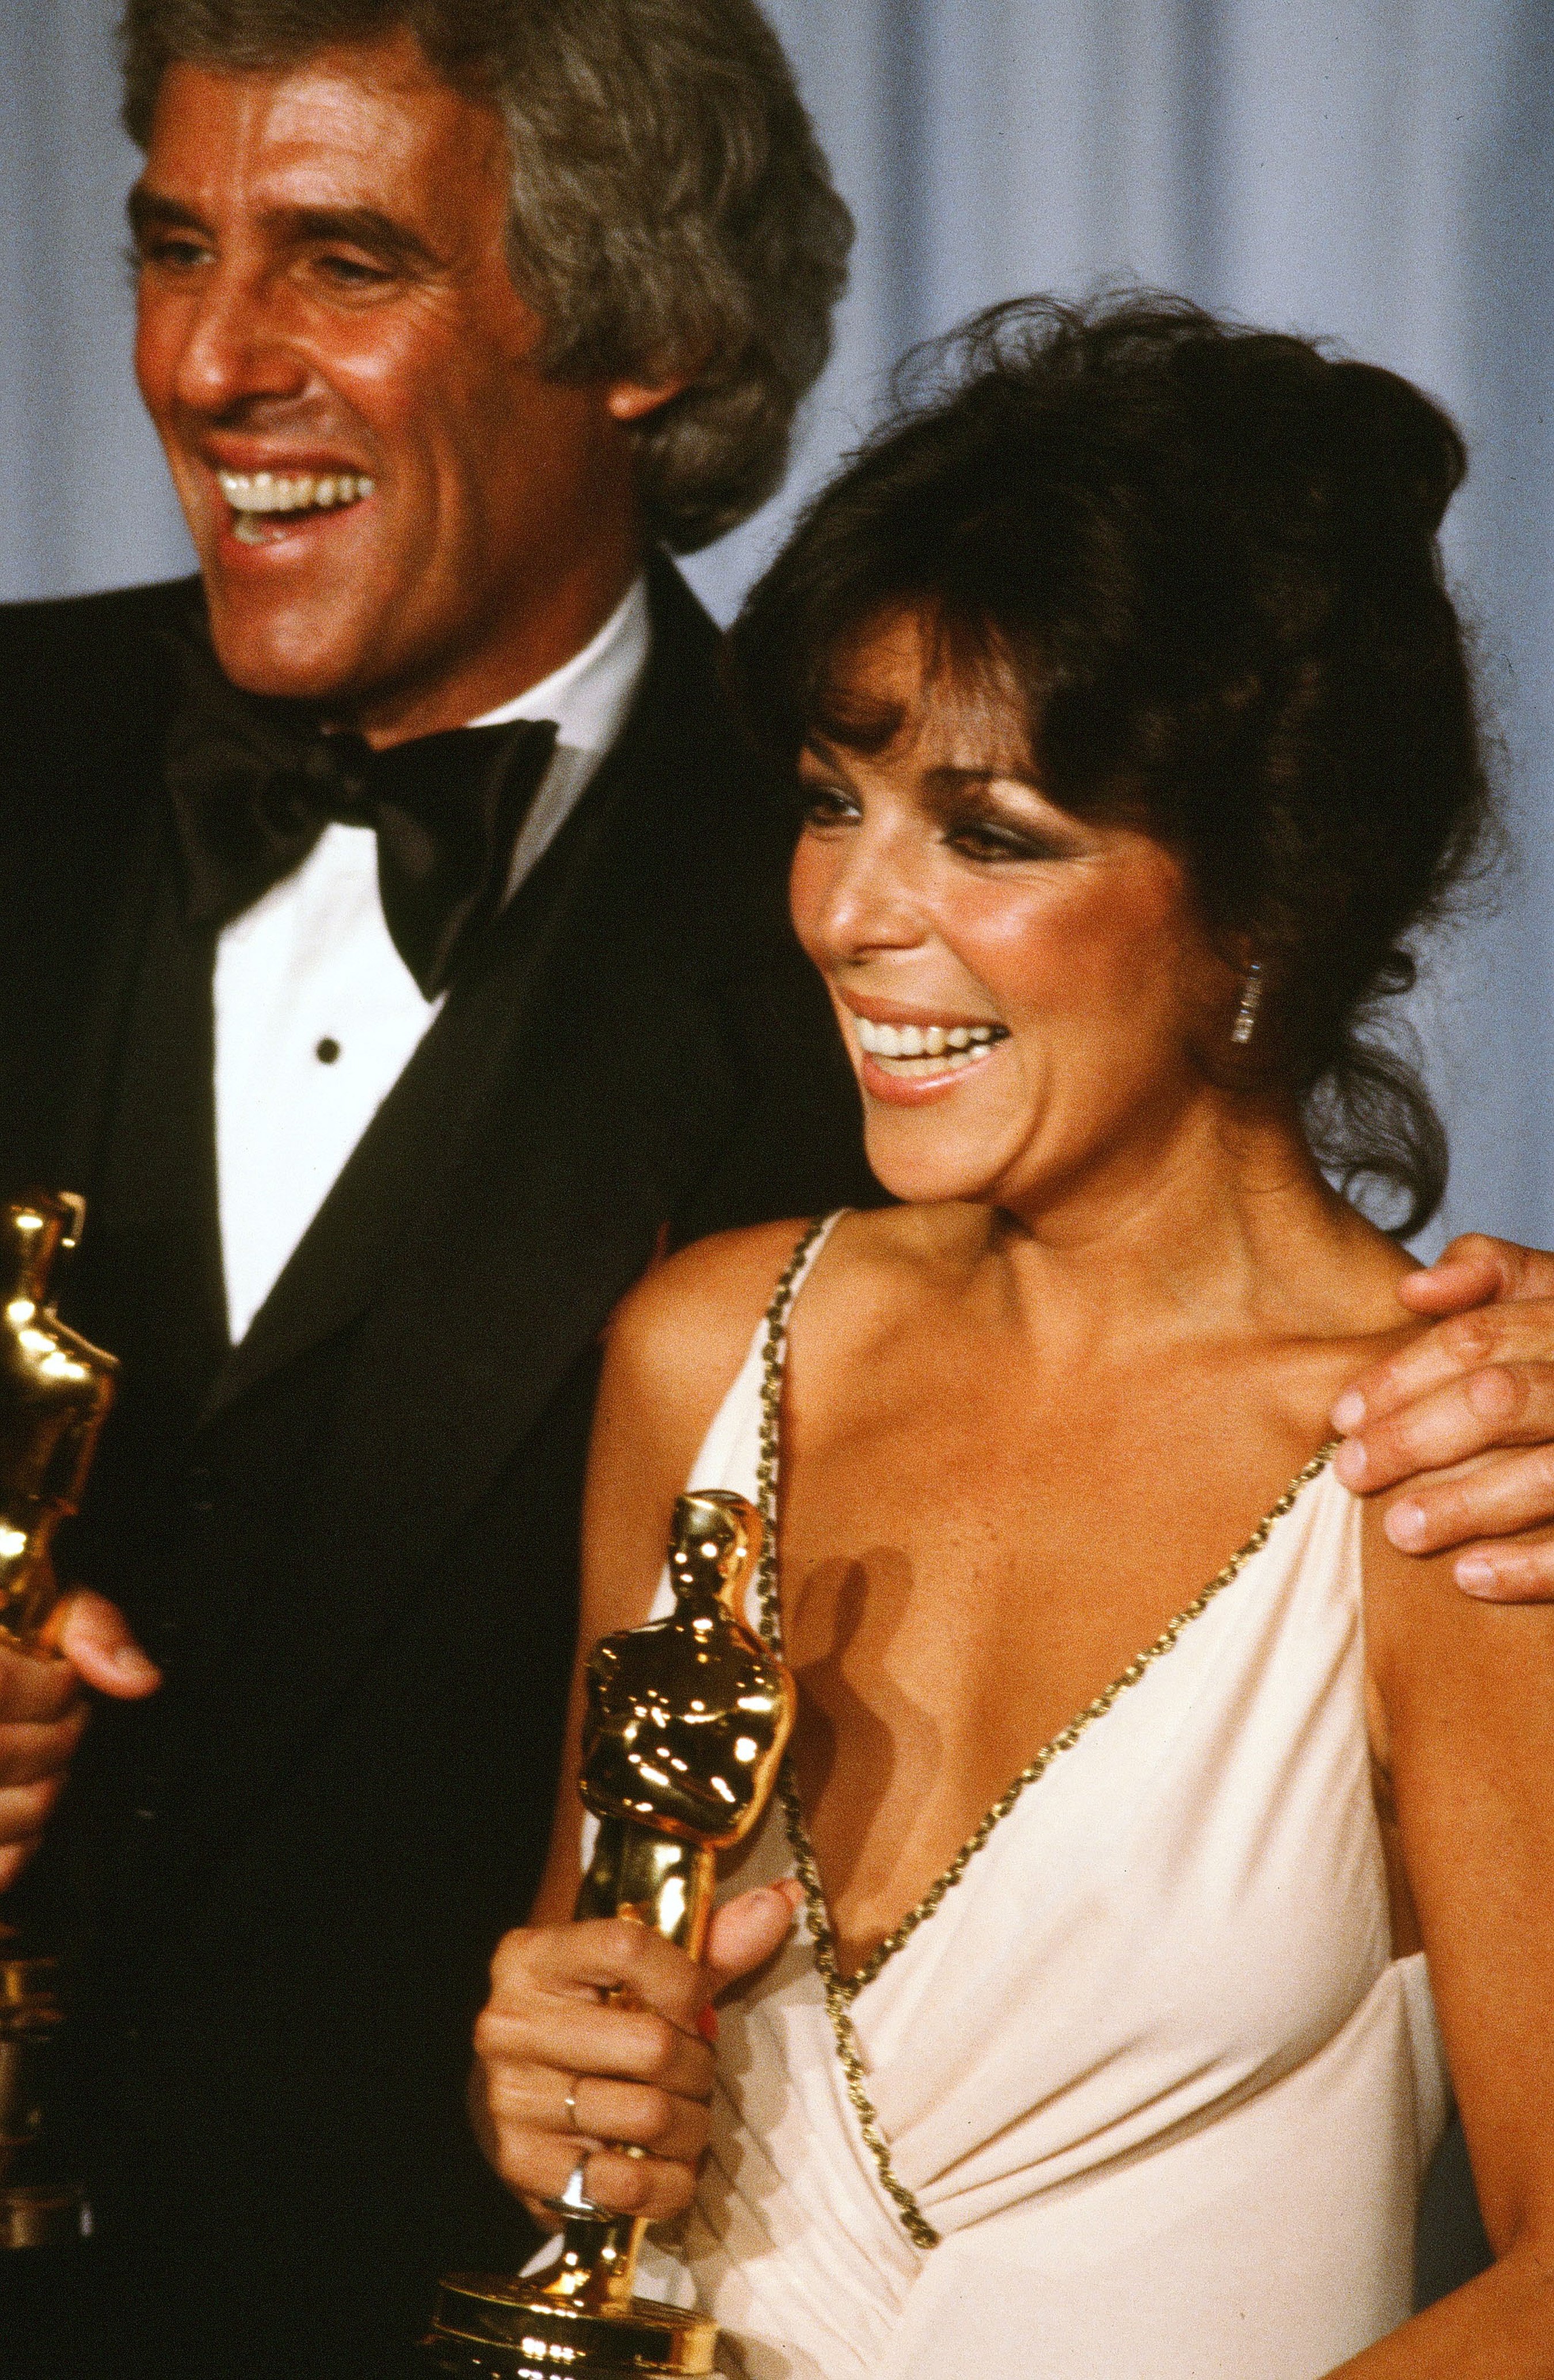 Composers Carole Bayer Sager and Burt Bacharach poses backstage after winning "Best Original Song" during the 54th Academy Awards on March 29, 1982, at Dorothy Chandler Pavilion in Los Angeles, California. | Source: Getty Images